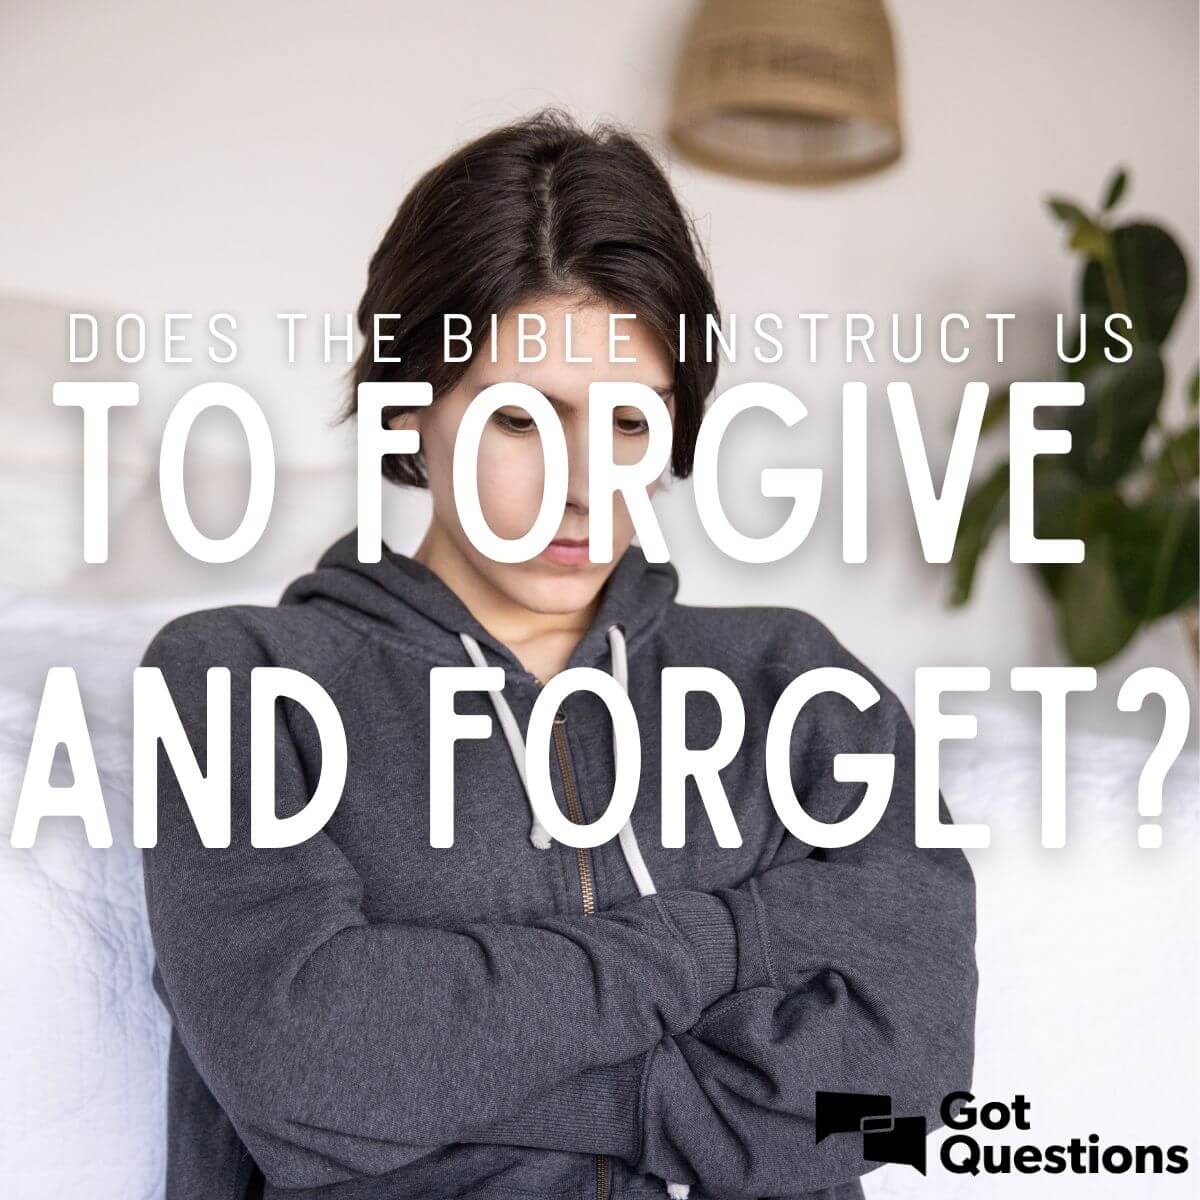 Does the Bible instruct us to forgive and forget?